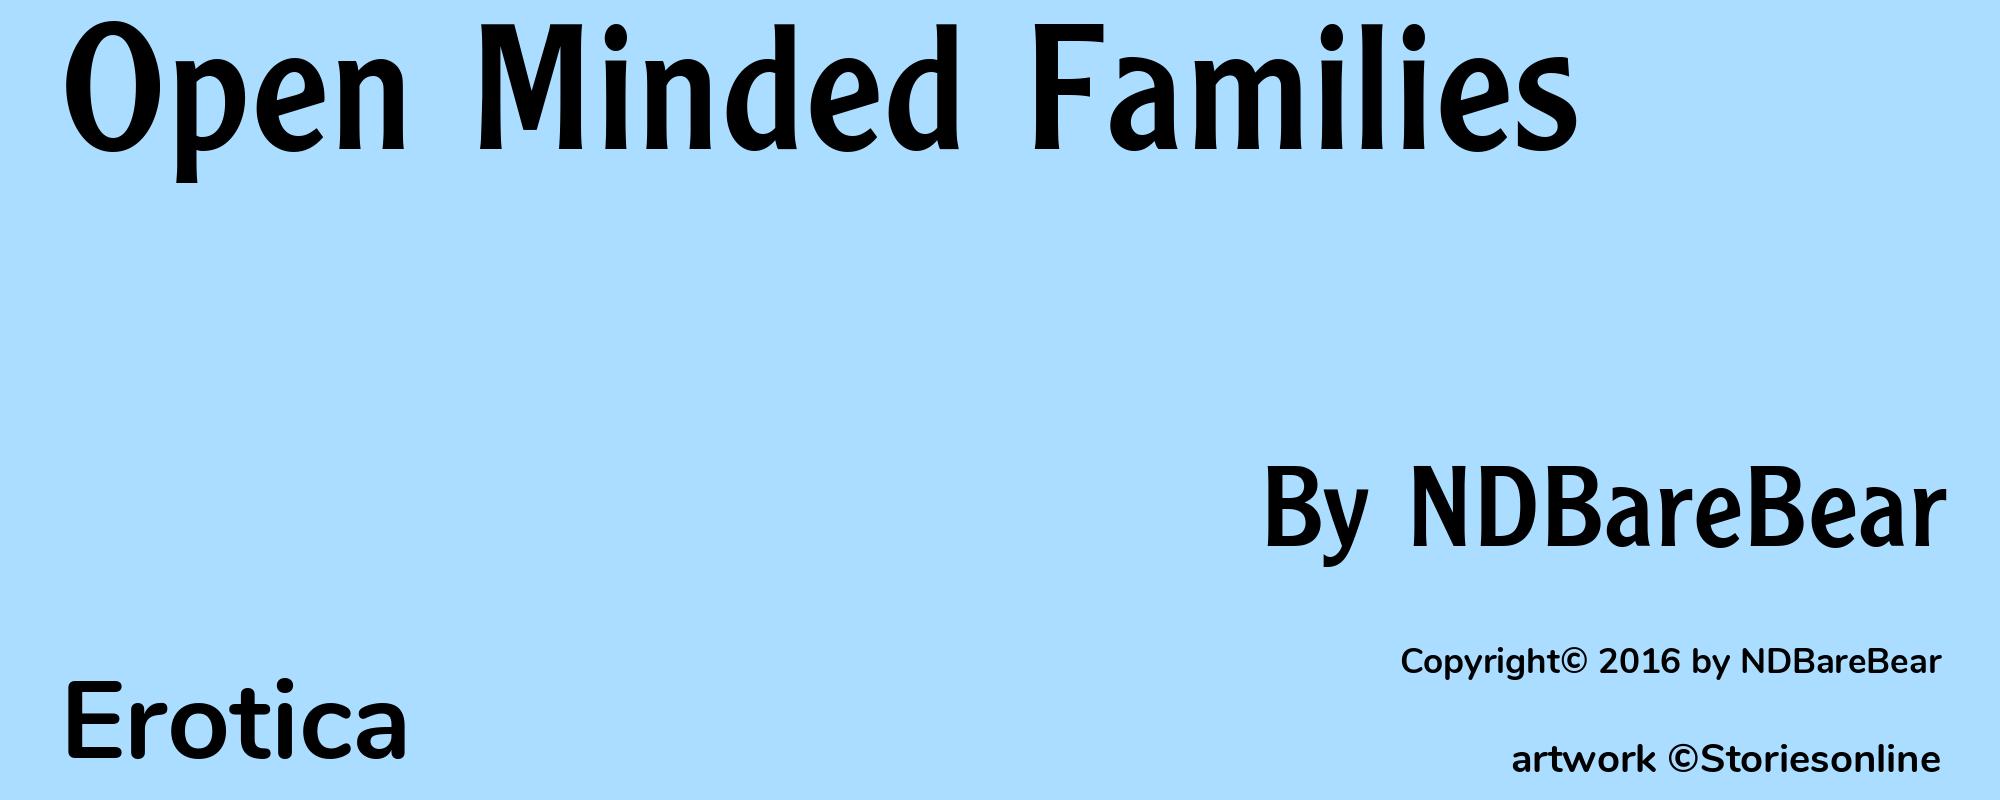 Open Minded Families - Cover